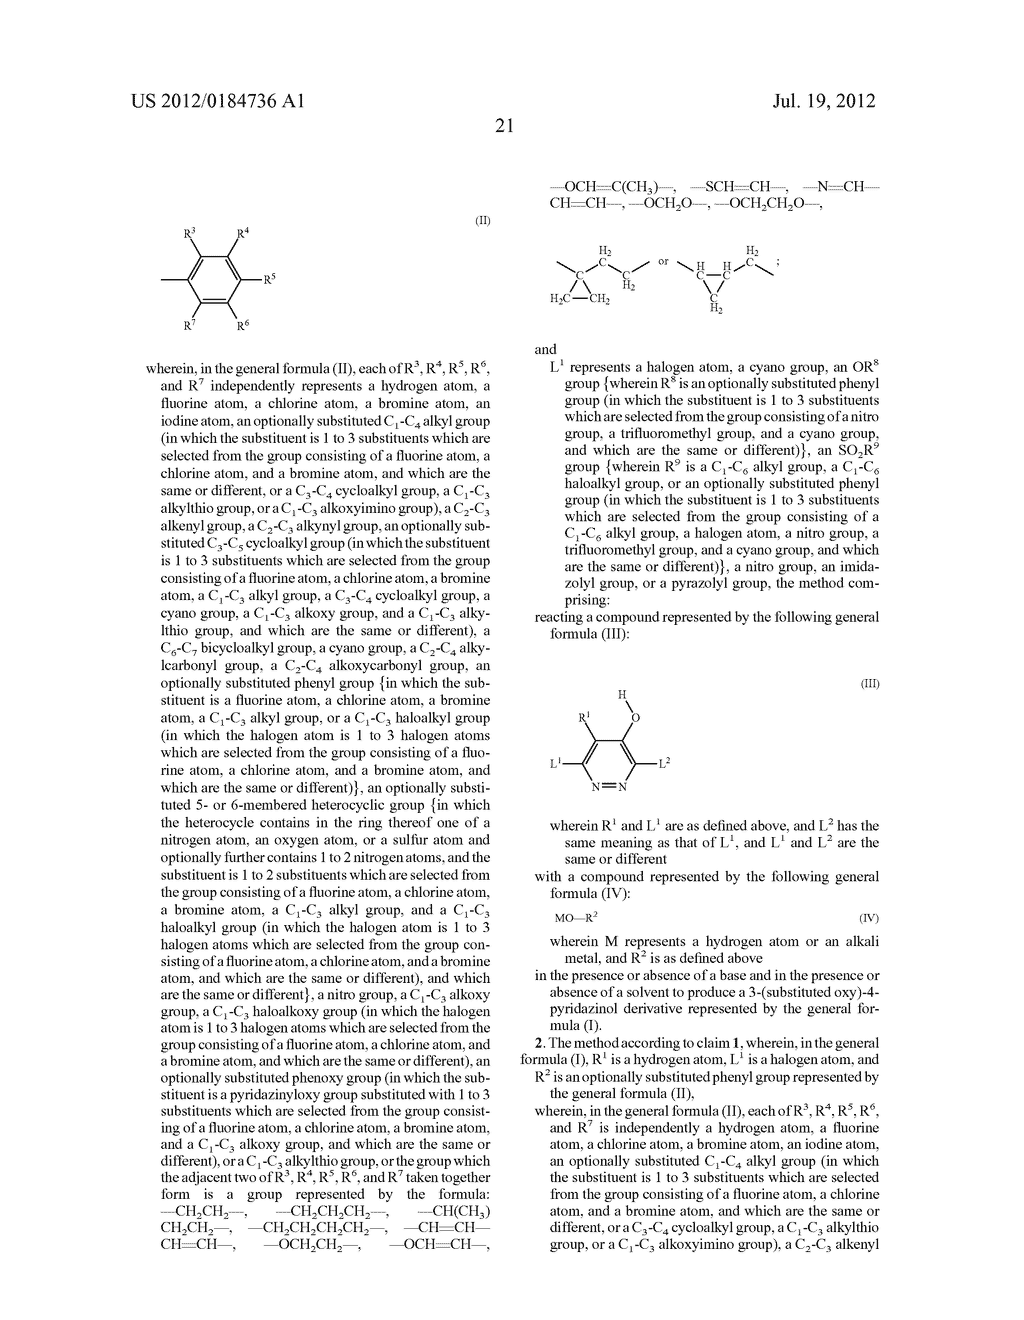 METHOD FOR PRODUCING A 3-(SUBSTITUTED-OXY)-4-PYRIDAZINOL DERIVATIVE - diagram, schematic, and image 22